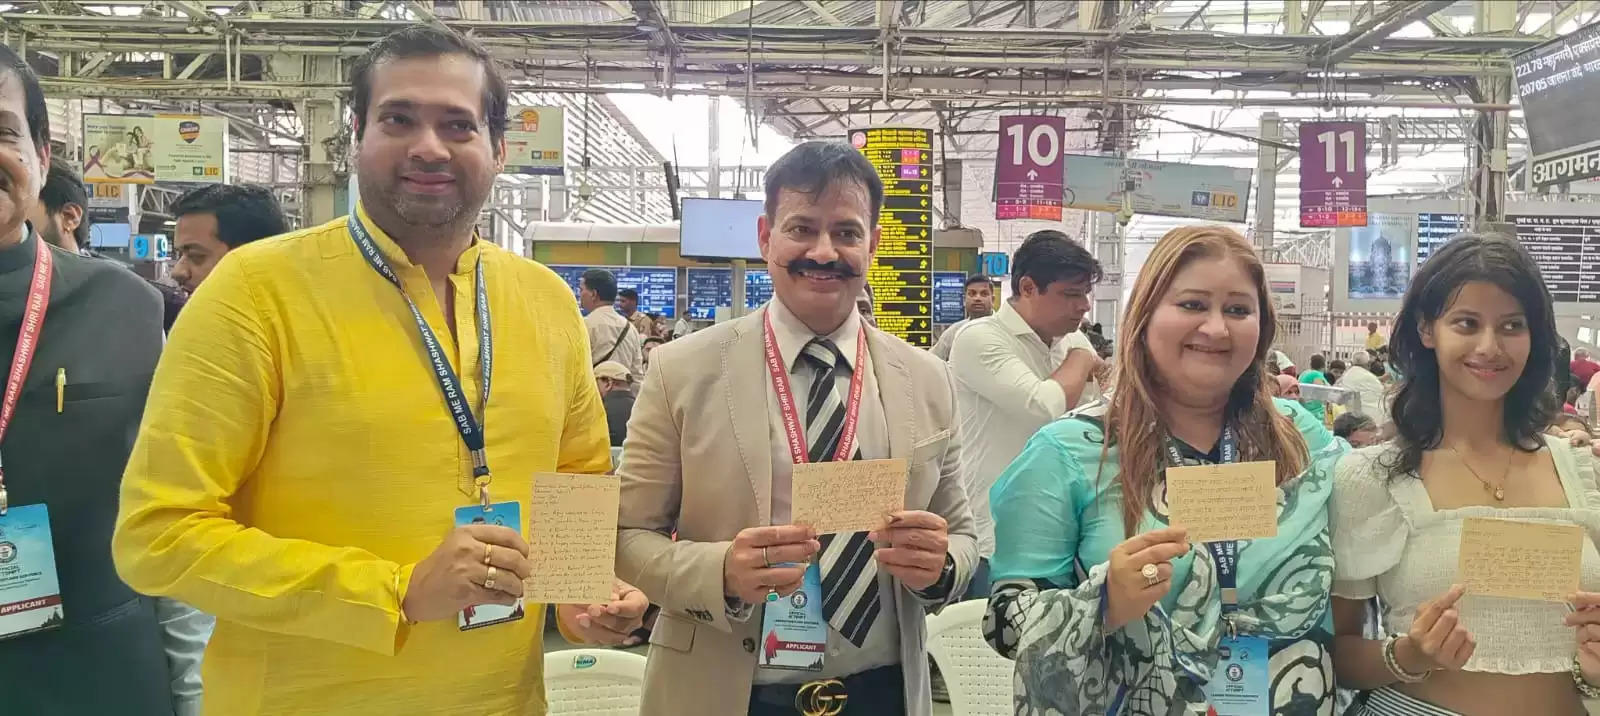 *Krishna Prakash (IPS), ADG -- Force One Collaborates with Postal Department and Divine Forces, Launches Postcard Initiative to Connect with God, attempts World Record*